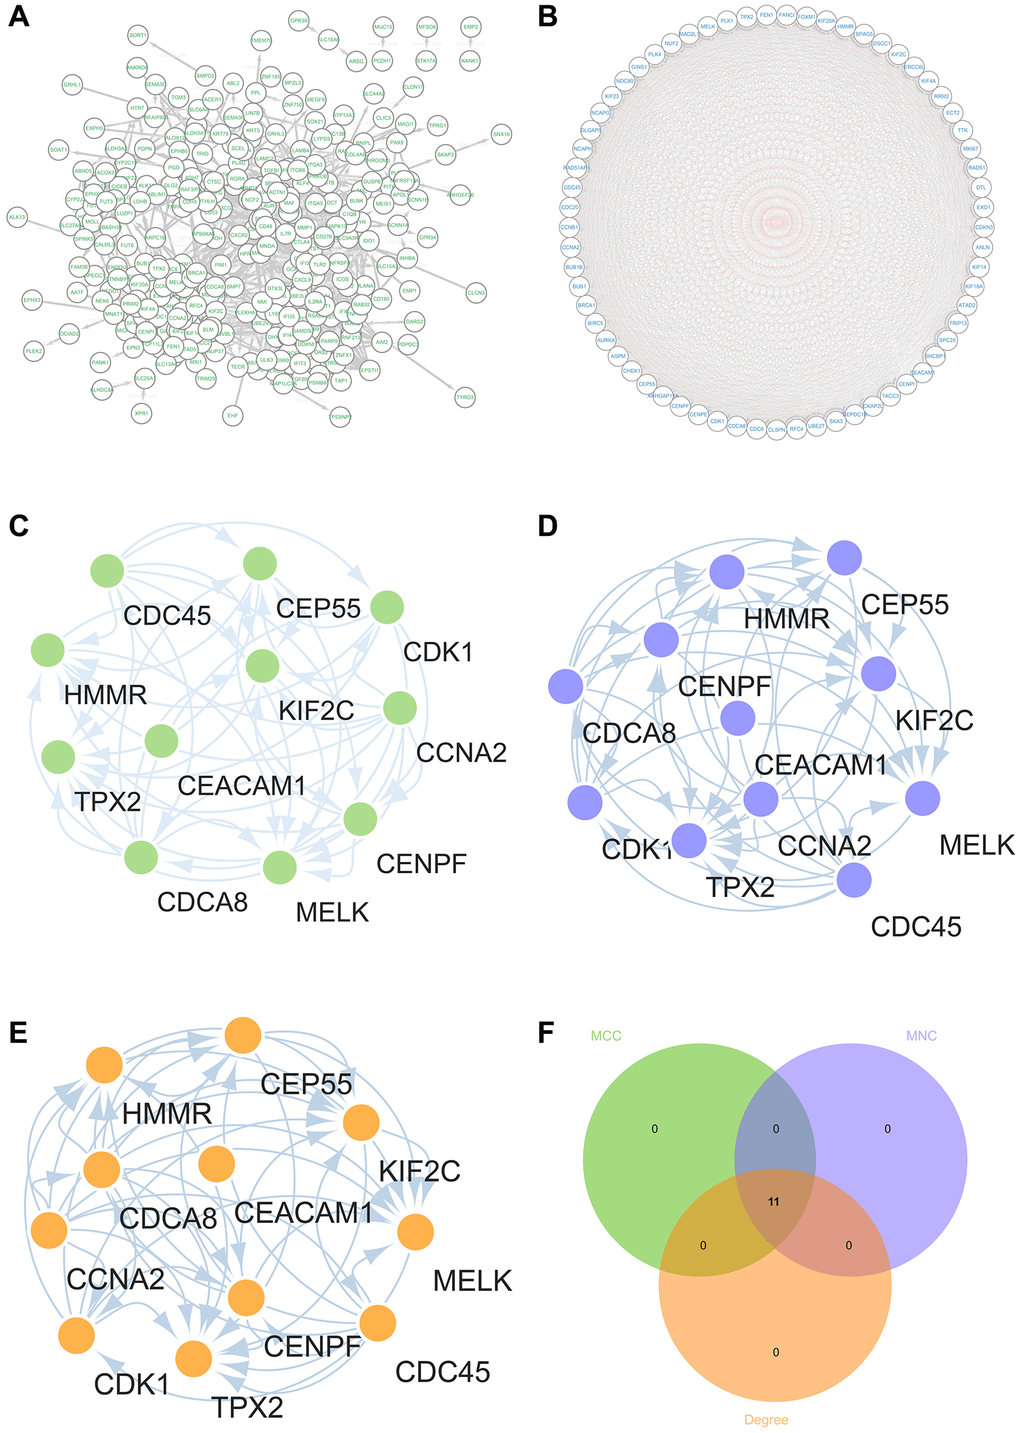 Construction and analysis of protein-protein interaction (PPI) network. (A) DEGs’s PPI network (B) The core gene cluster. (C) MCC was used to identify central genes (D) MNC was used to identify central genes (E) Degree was used to identify central genes (F) taking the intersection of Venn diagram.